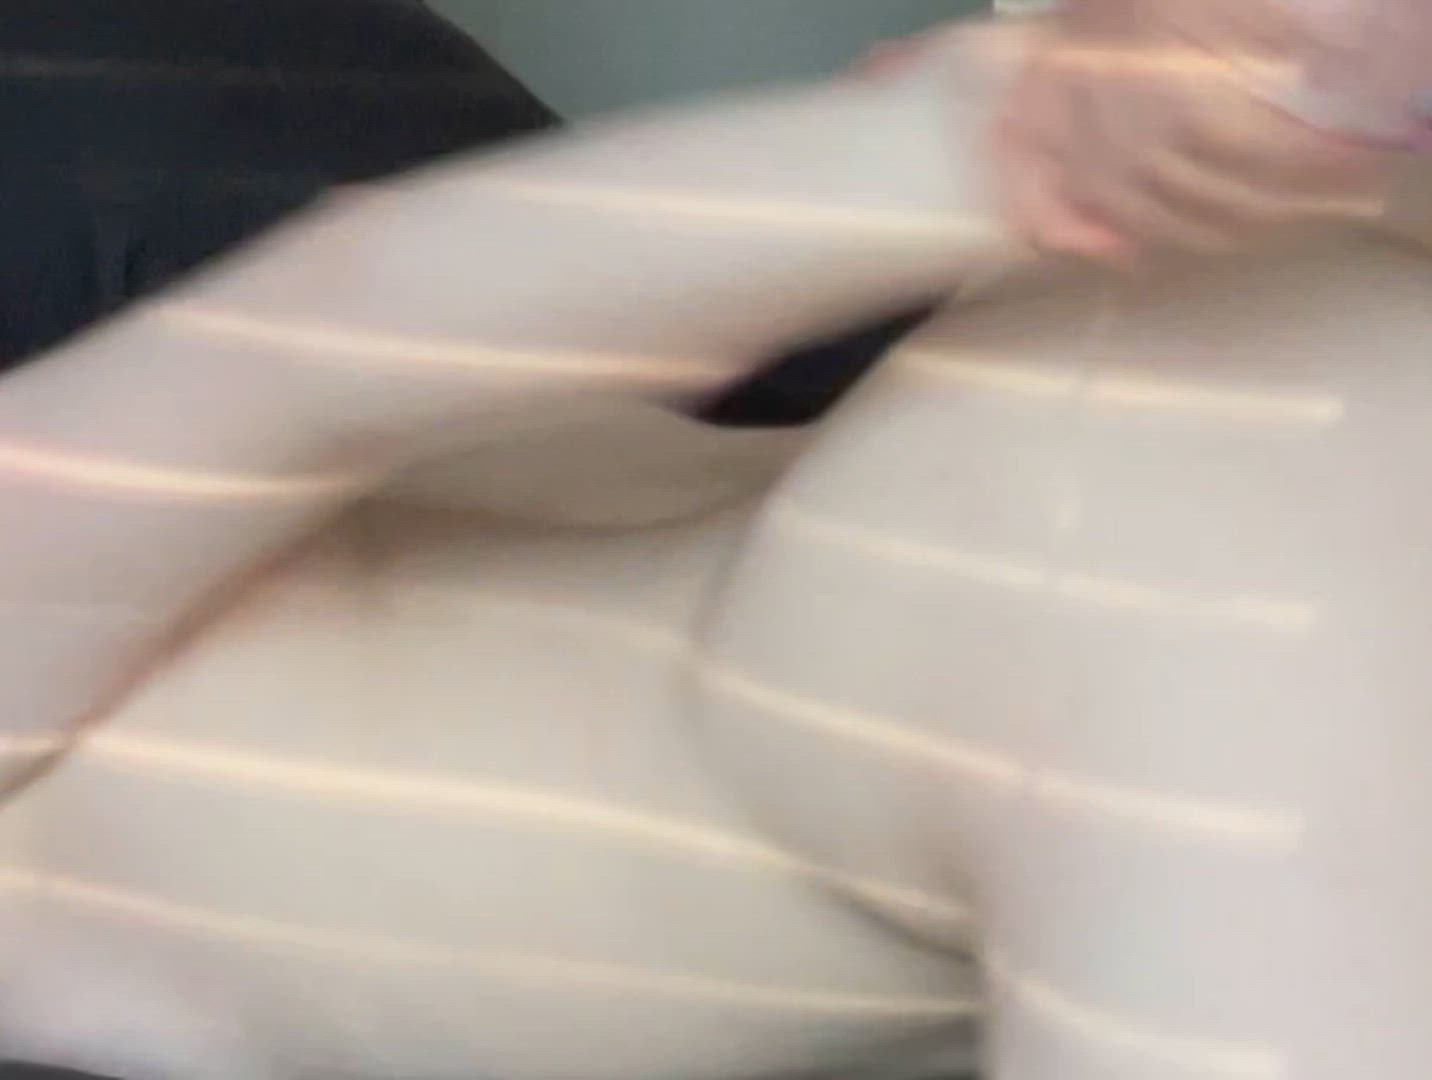 Cum porn video with onlyfans model Sara Hope <strong>@sarahope</strong>